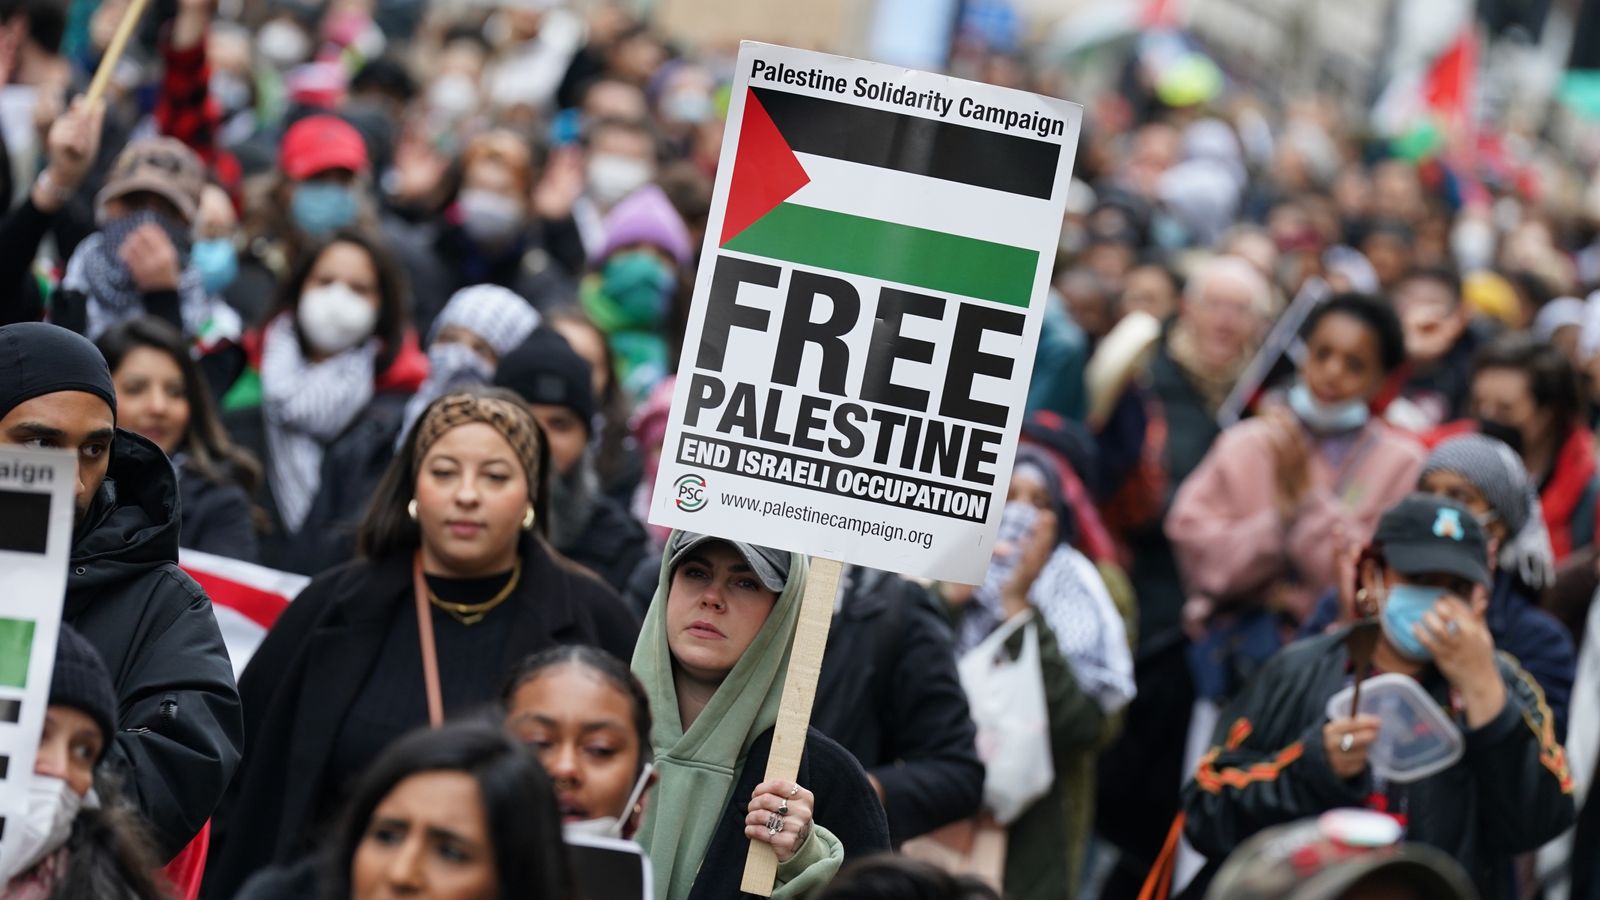 Pro-Palestine protesters disrupt Oxford Street Christmas shoppers in call to boycott 'pro-Israel' brands